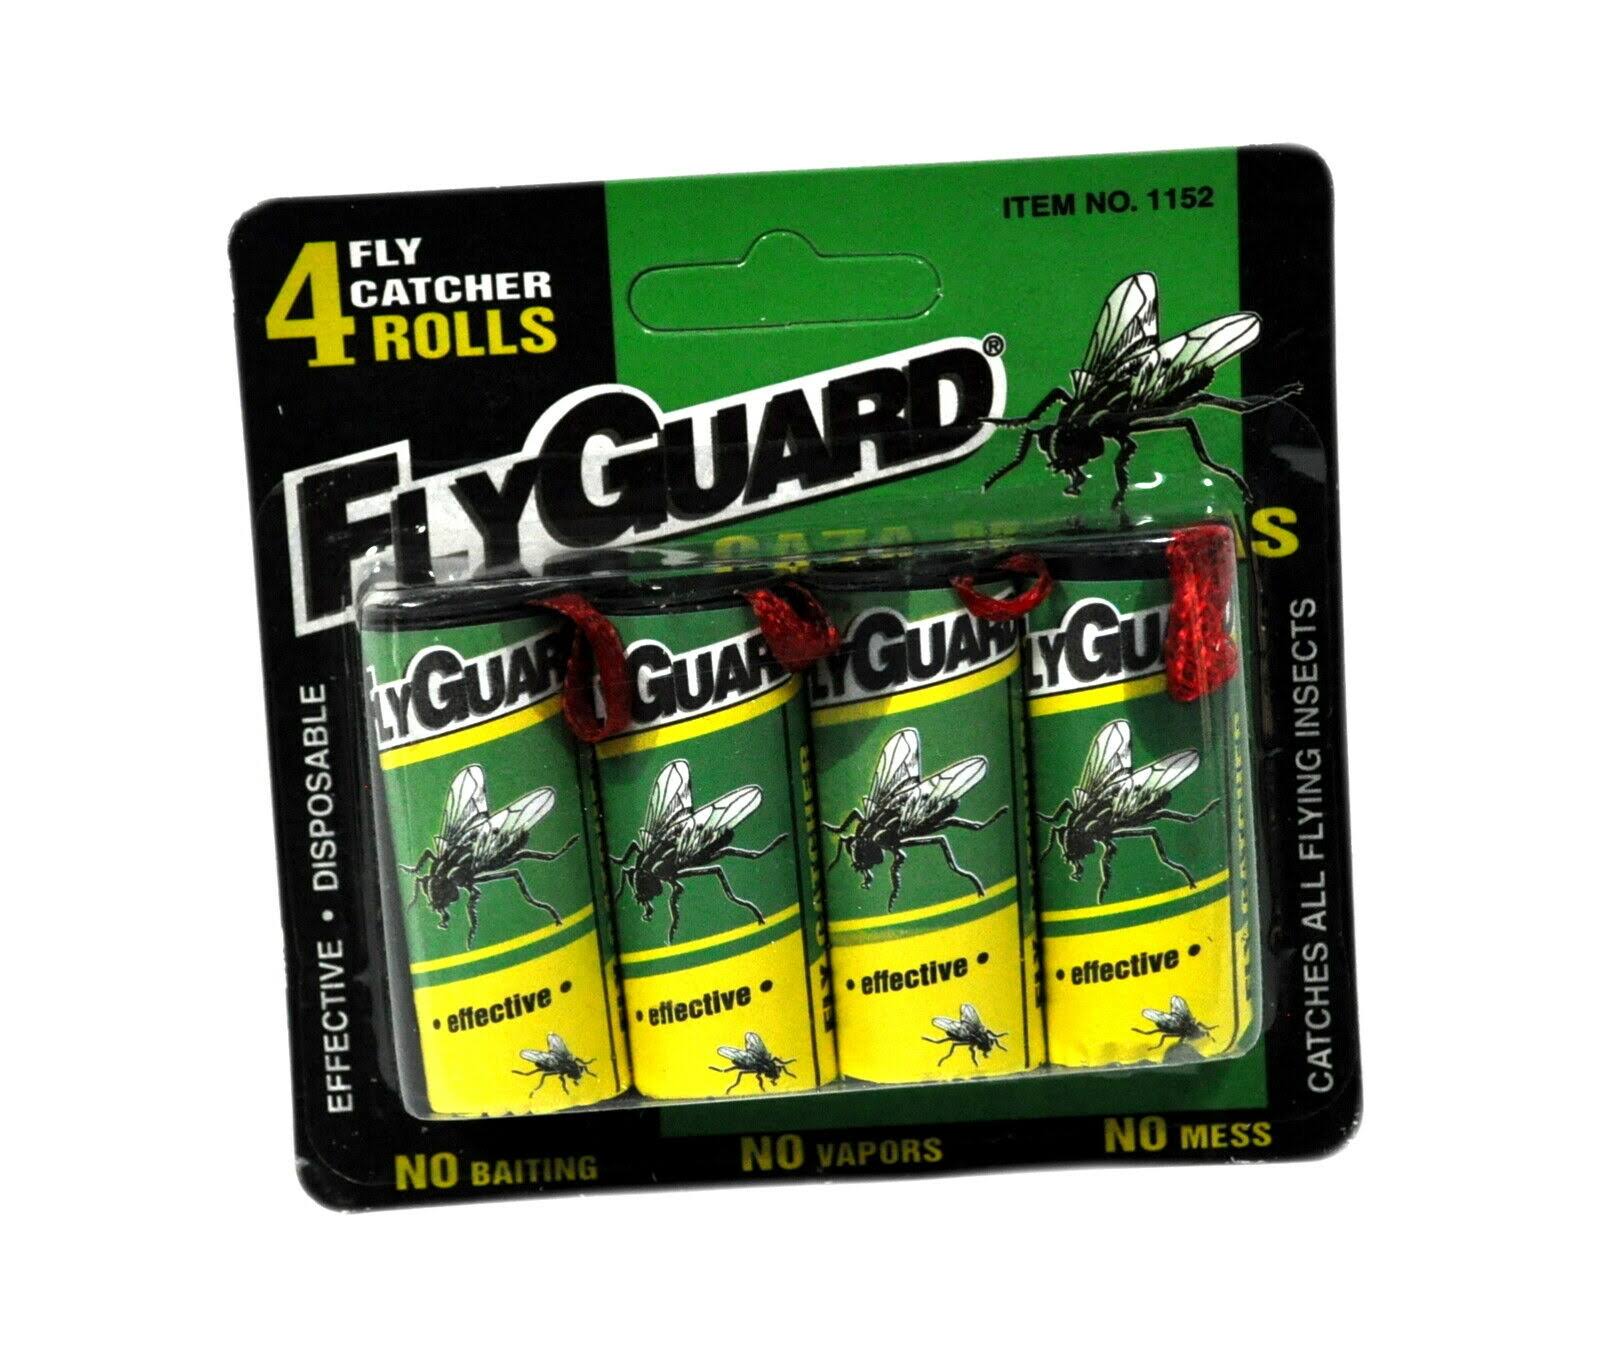 Fly Guard Fly Paper Rolls 4 Pack 1152